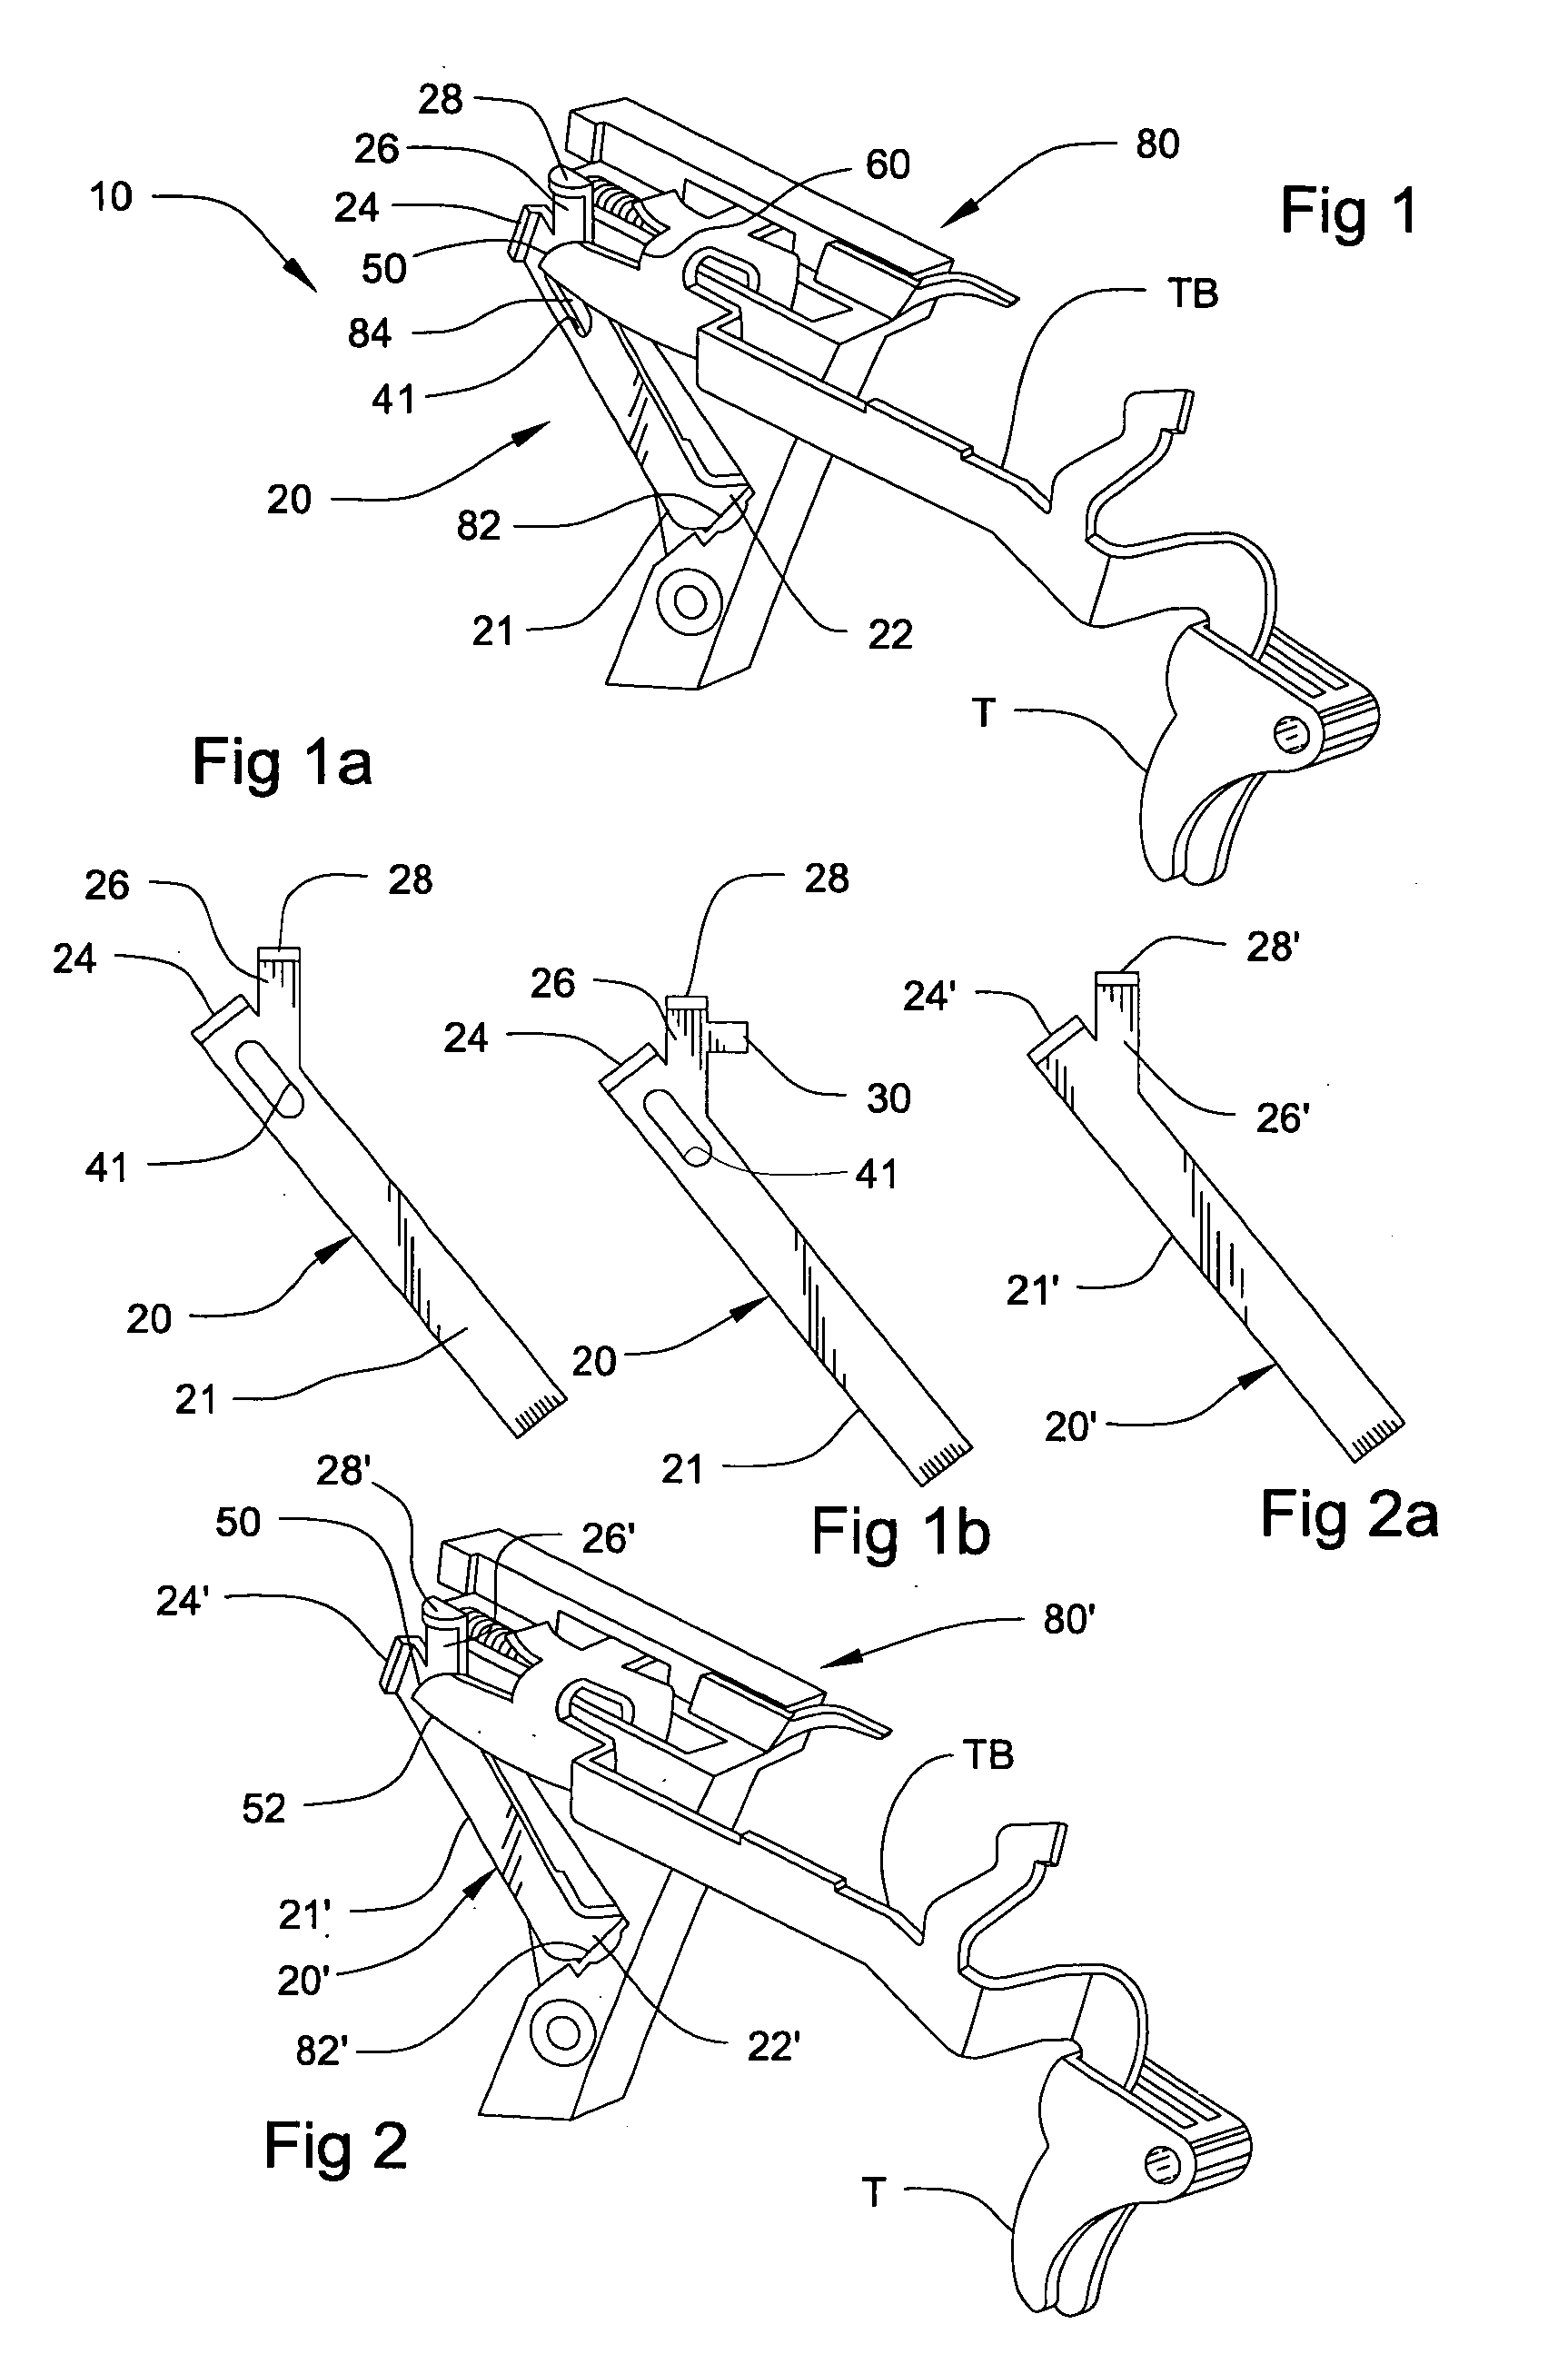 Self-cleaning trigger connector system